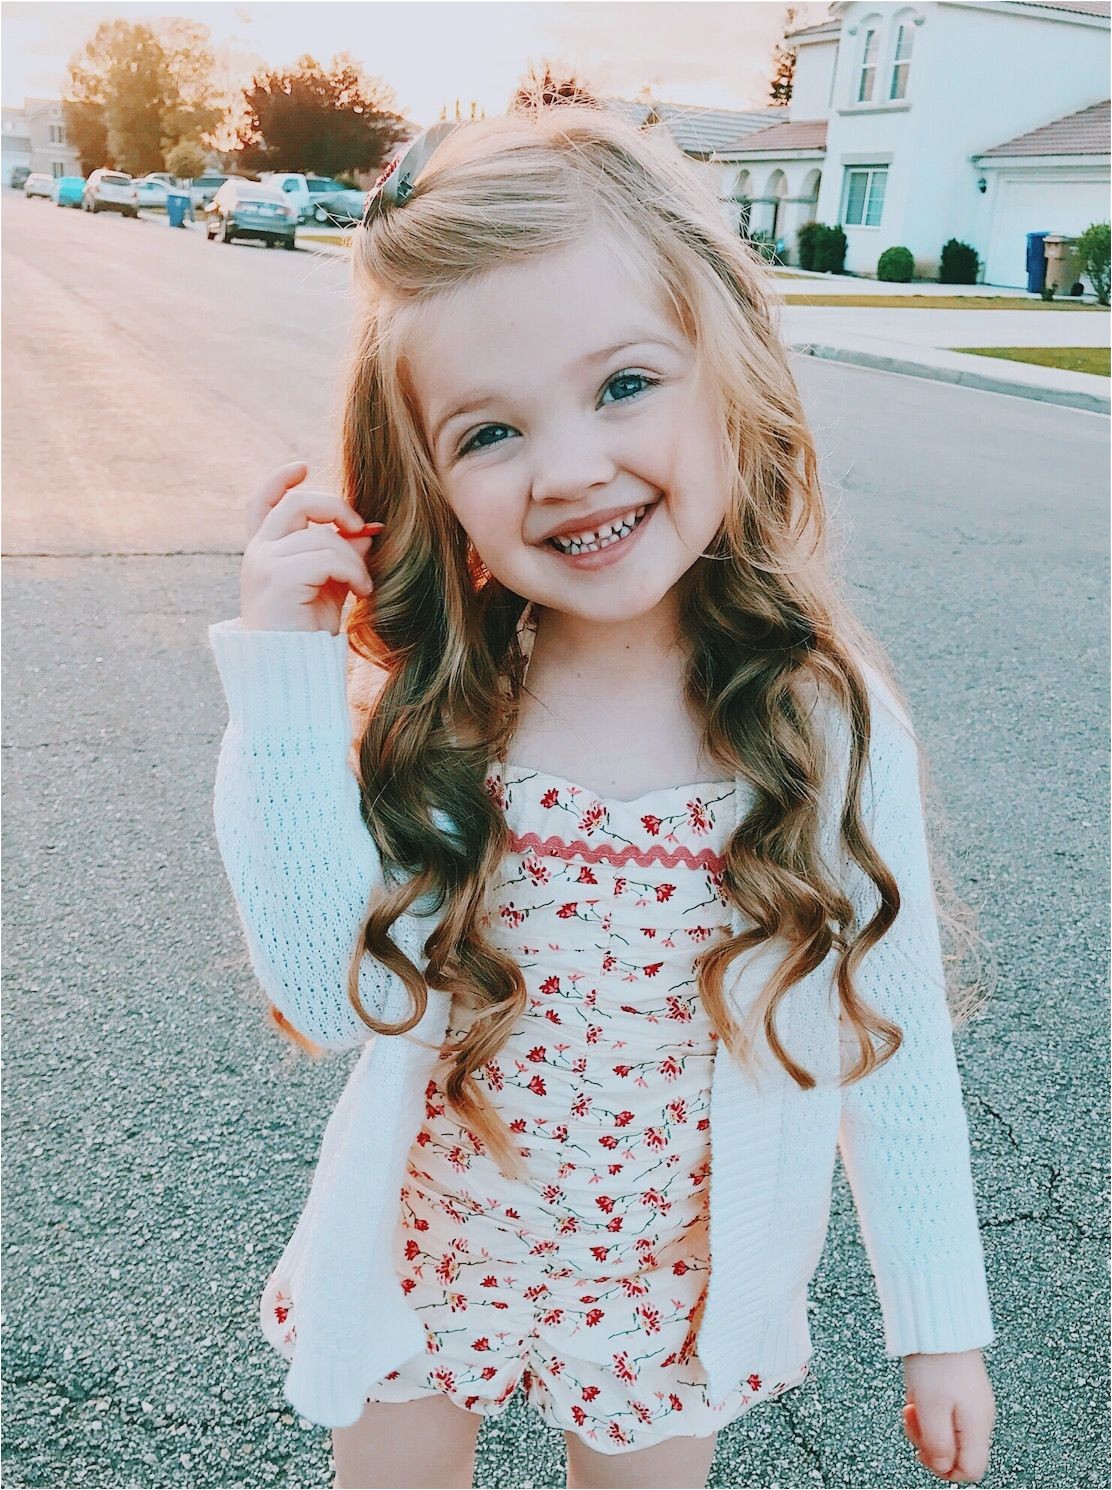 Hairstyles for Little Girls with Short Hair for A Wedding Little Girl Hairstyle Long Hair Curls Curled Wavy Beach Waves